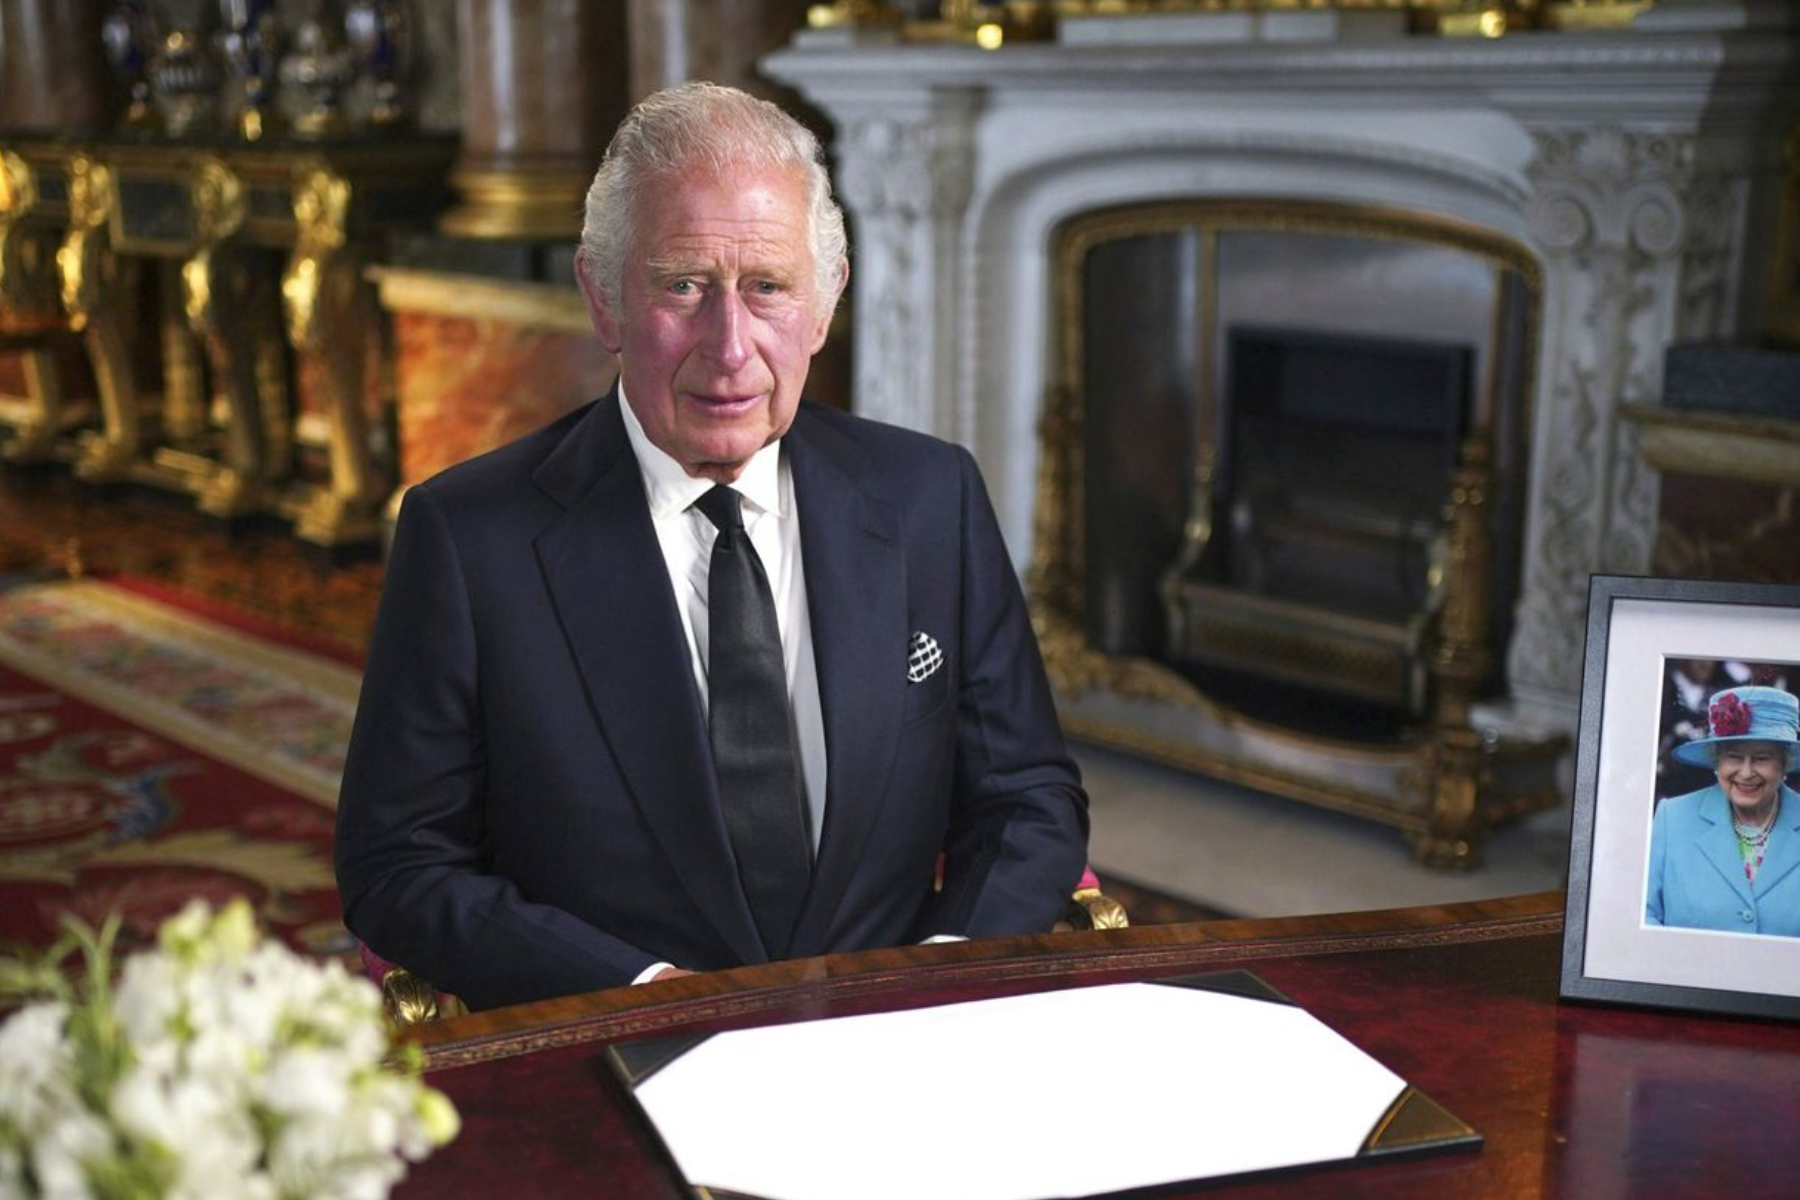 King Charles III seated at a table with a photograph of his late mother Queen Elizabeth